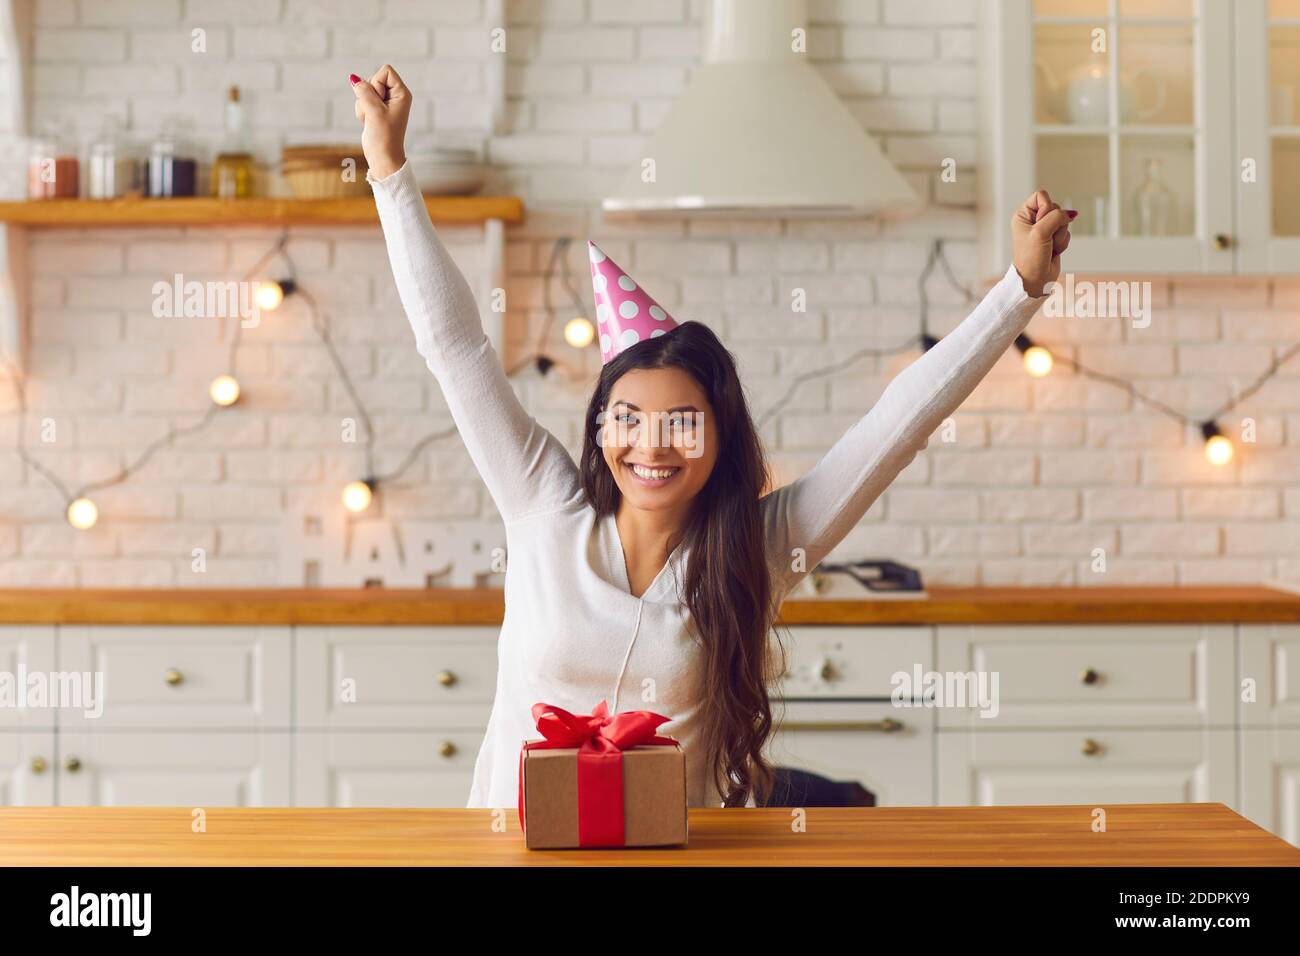 Cheerful woman celebrating her birthday at a virtual party with friends through a video call. Stock Photo